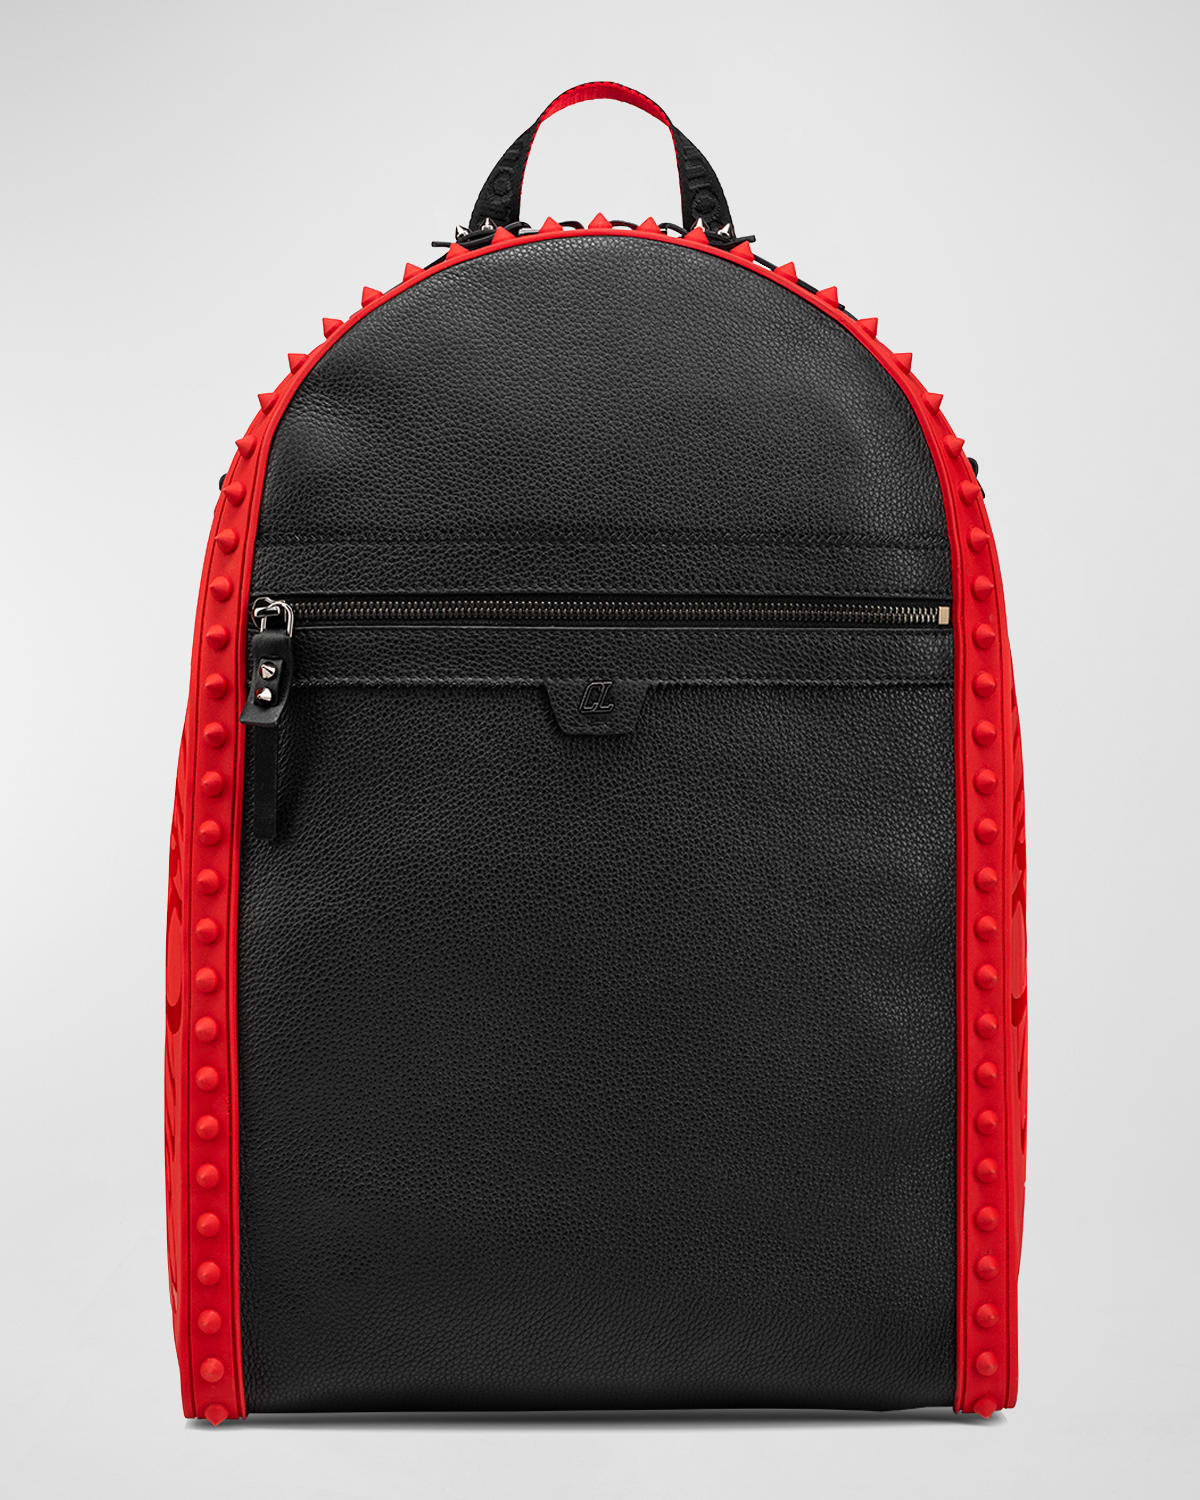 Christian Louboutin Men's Spiked Red Sole Leather Backpack In Black/loubi/black